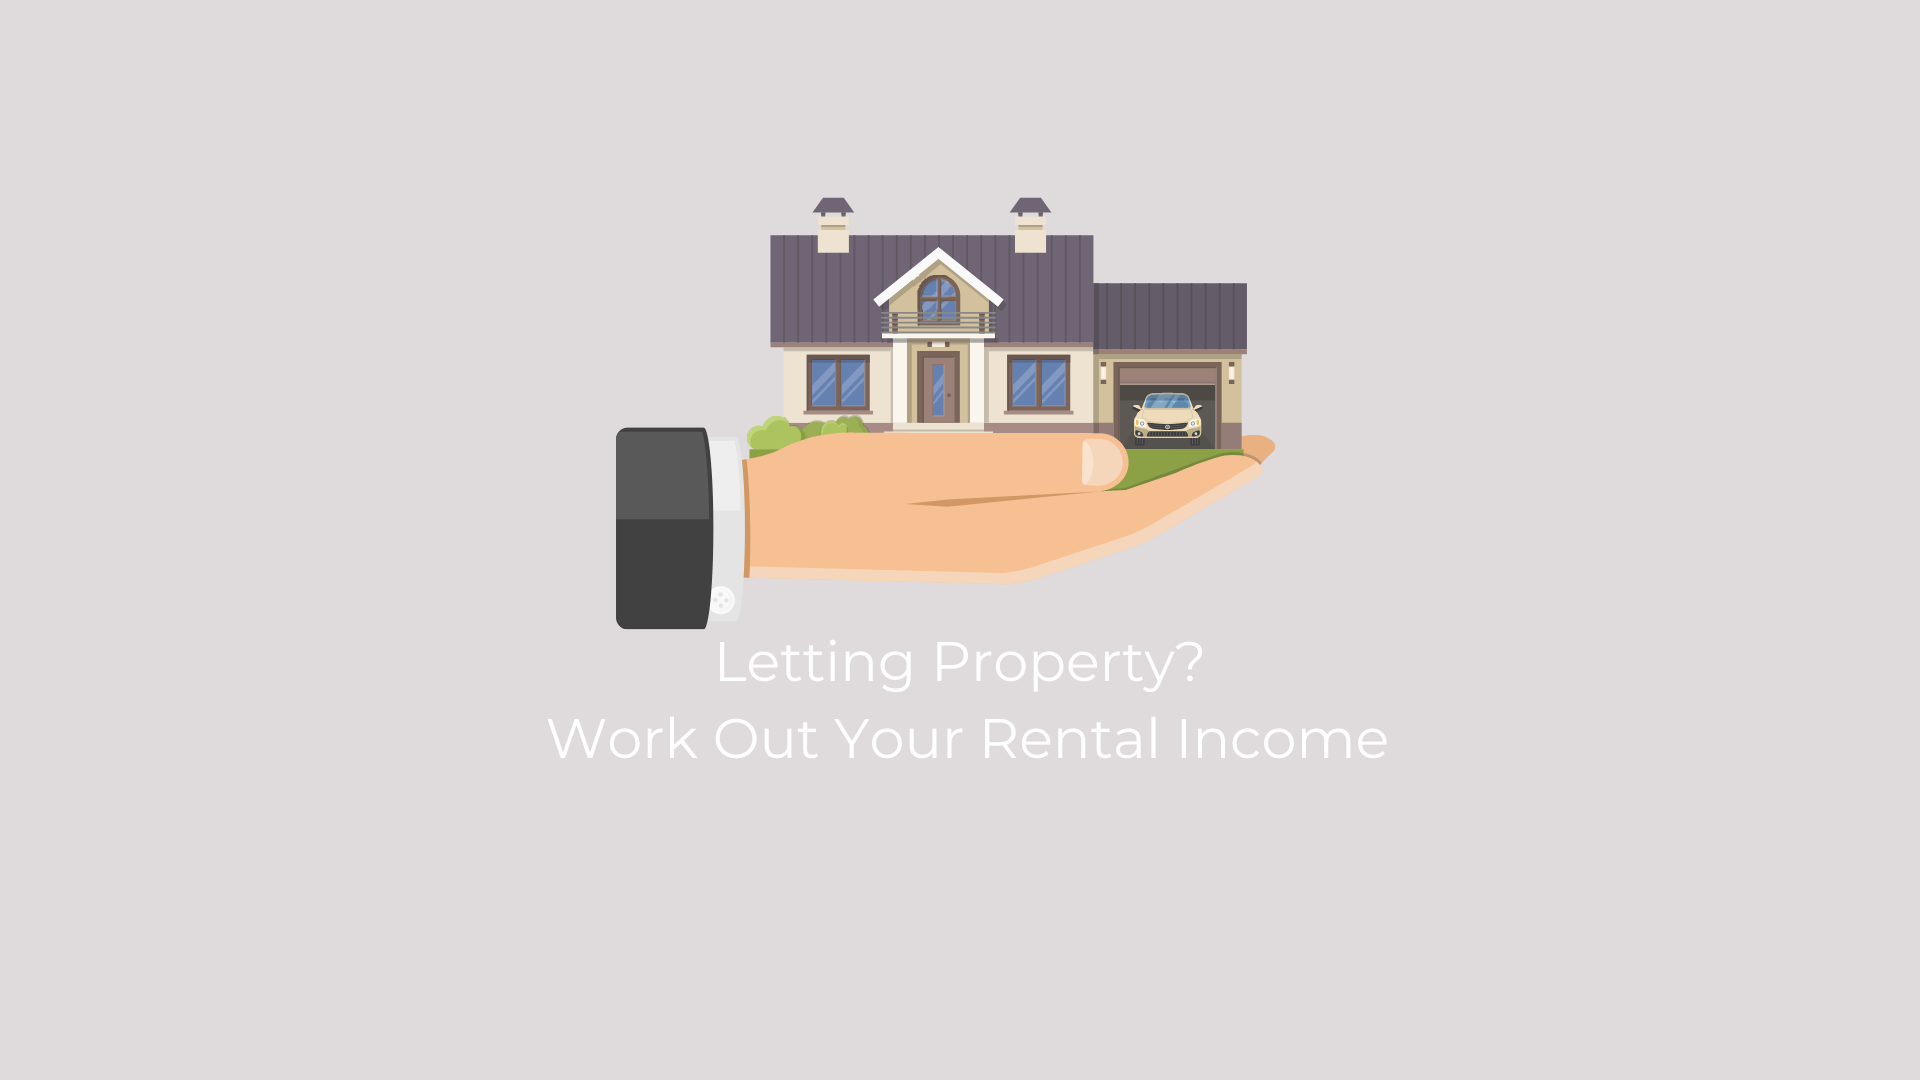 work out your rental income